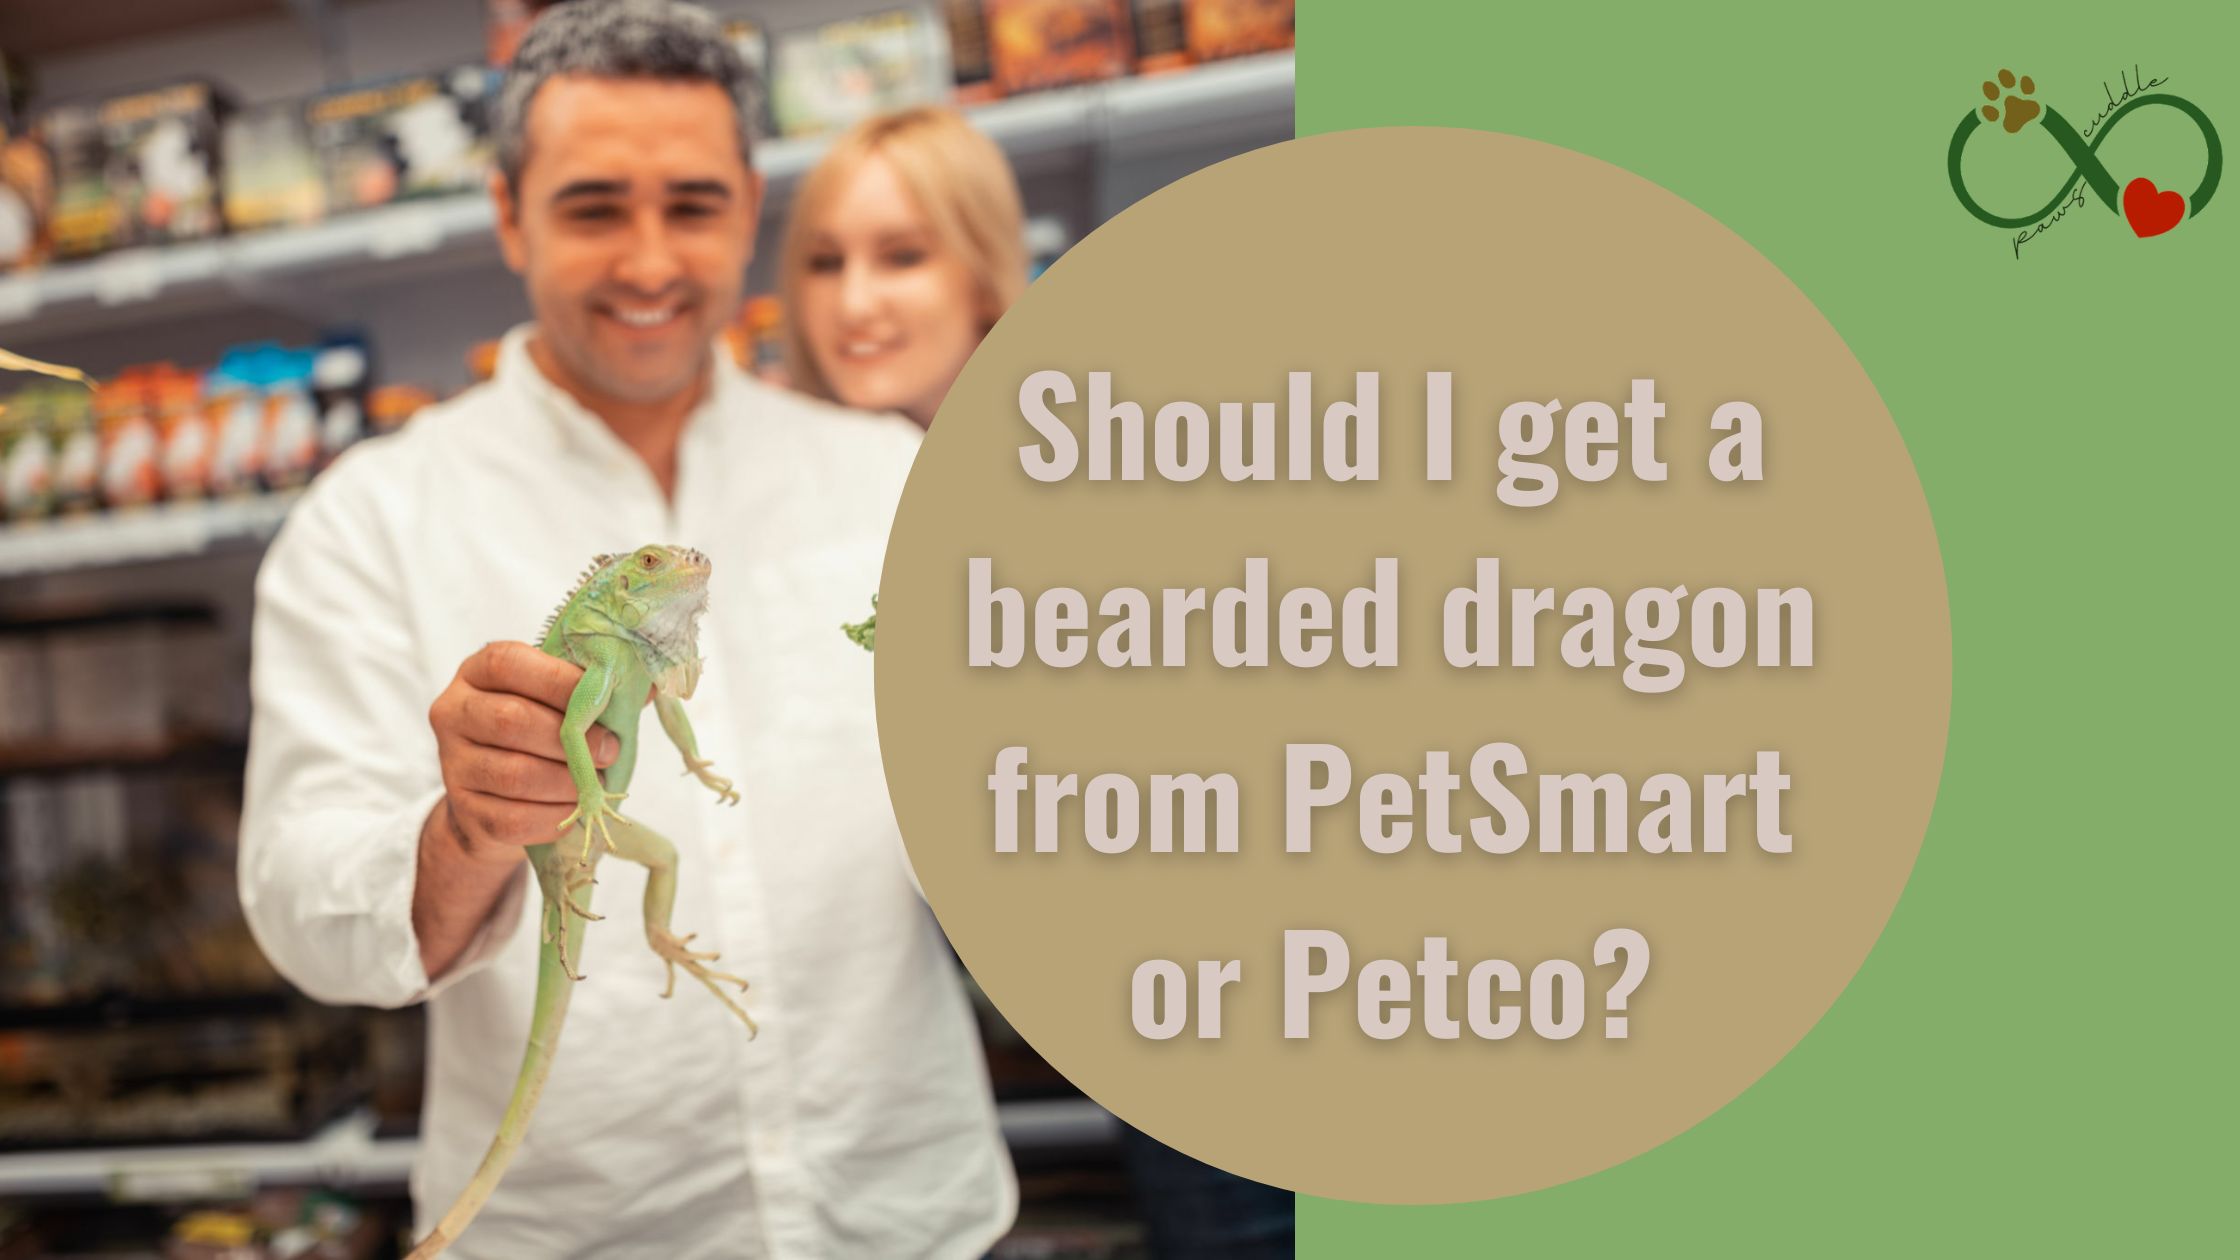 Should I get a bearded dragon from PetSmart or Petco?